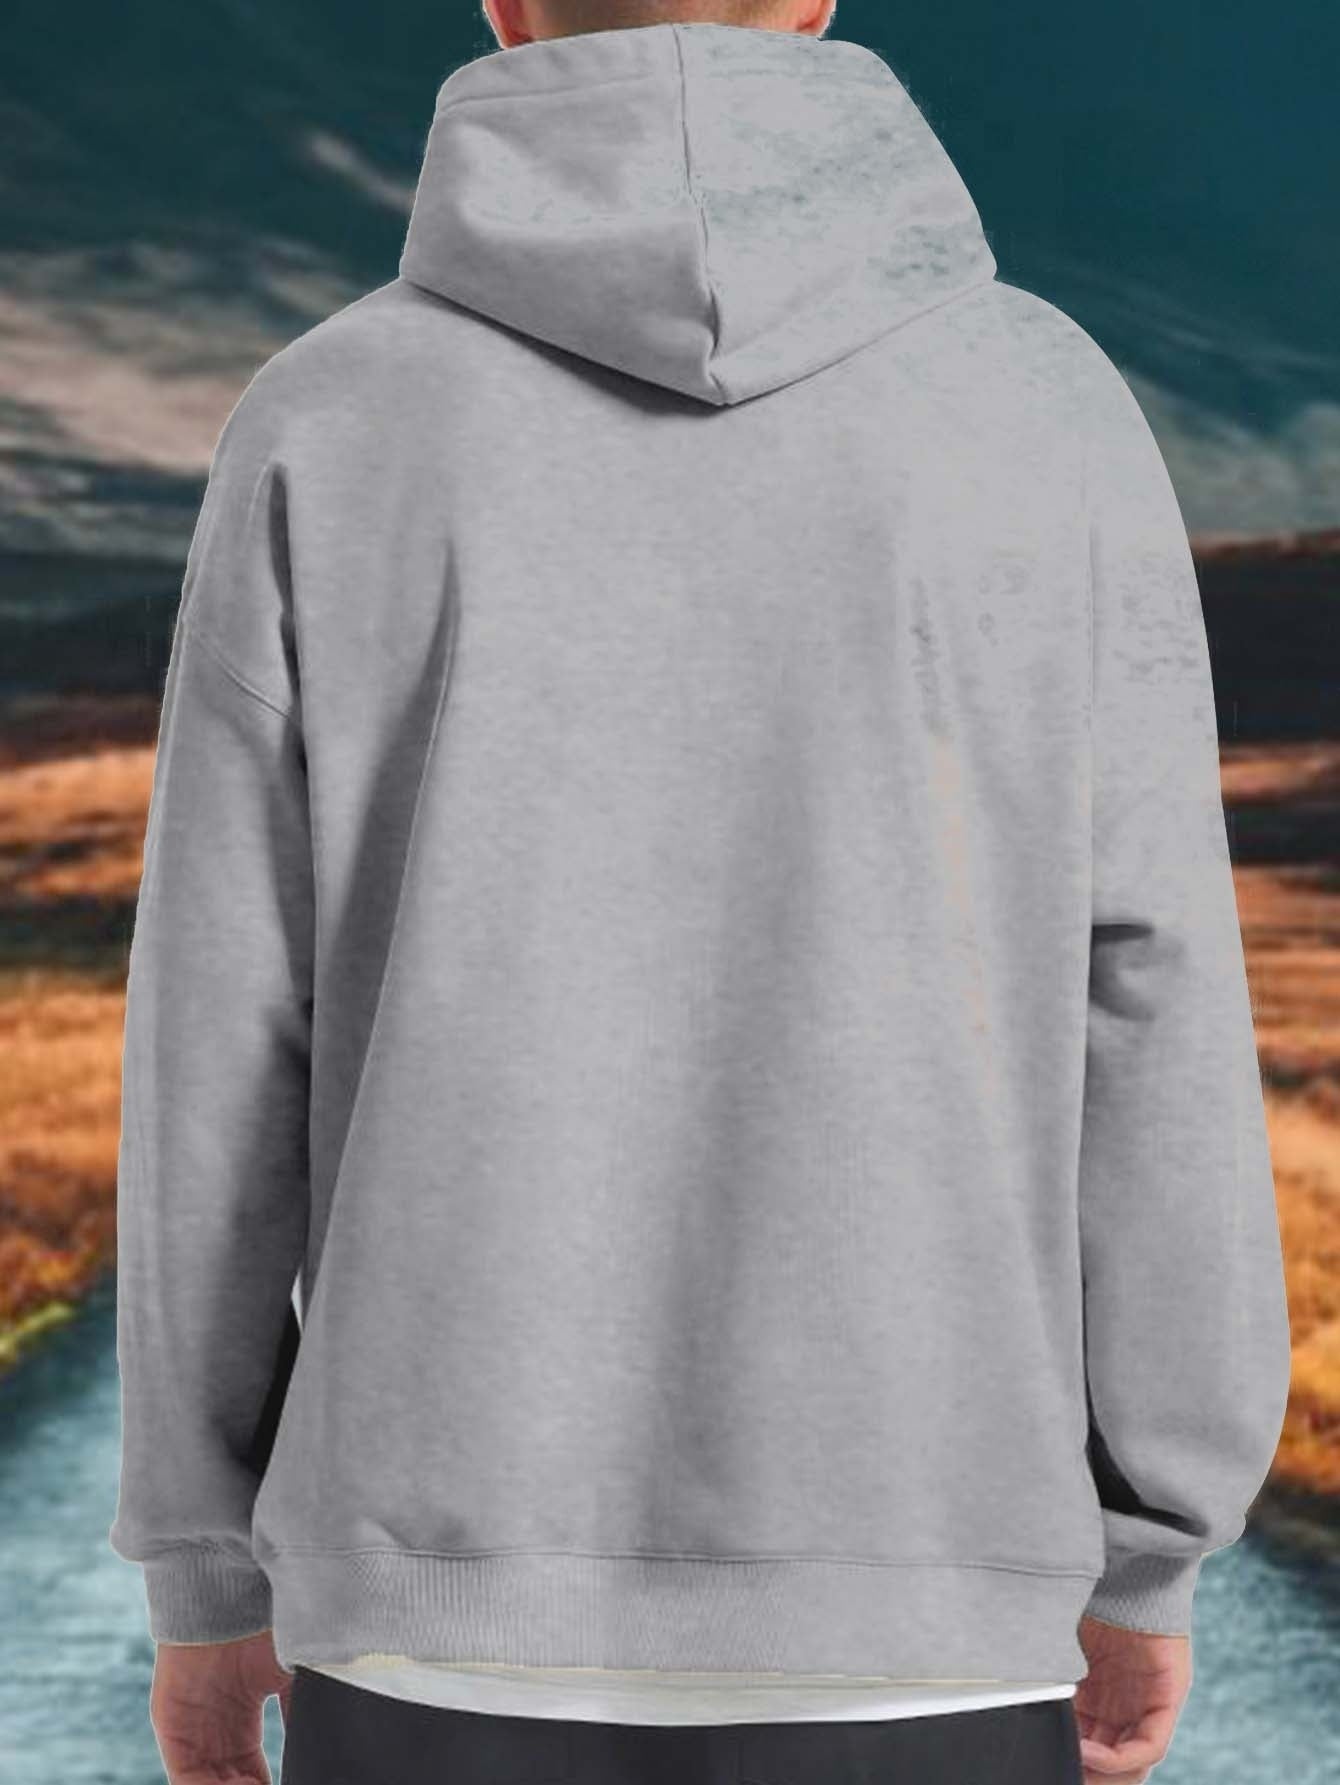 Inhale Courage Exhale Fear Men's Christian Pullover Hooded Sweatshirt claimedbygoddesigns